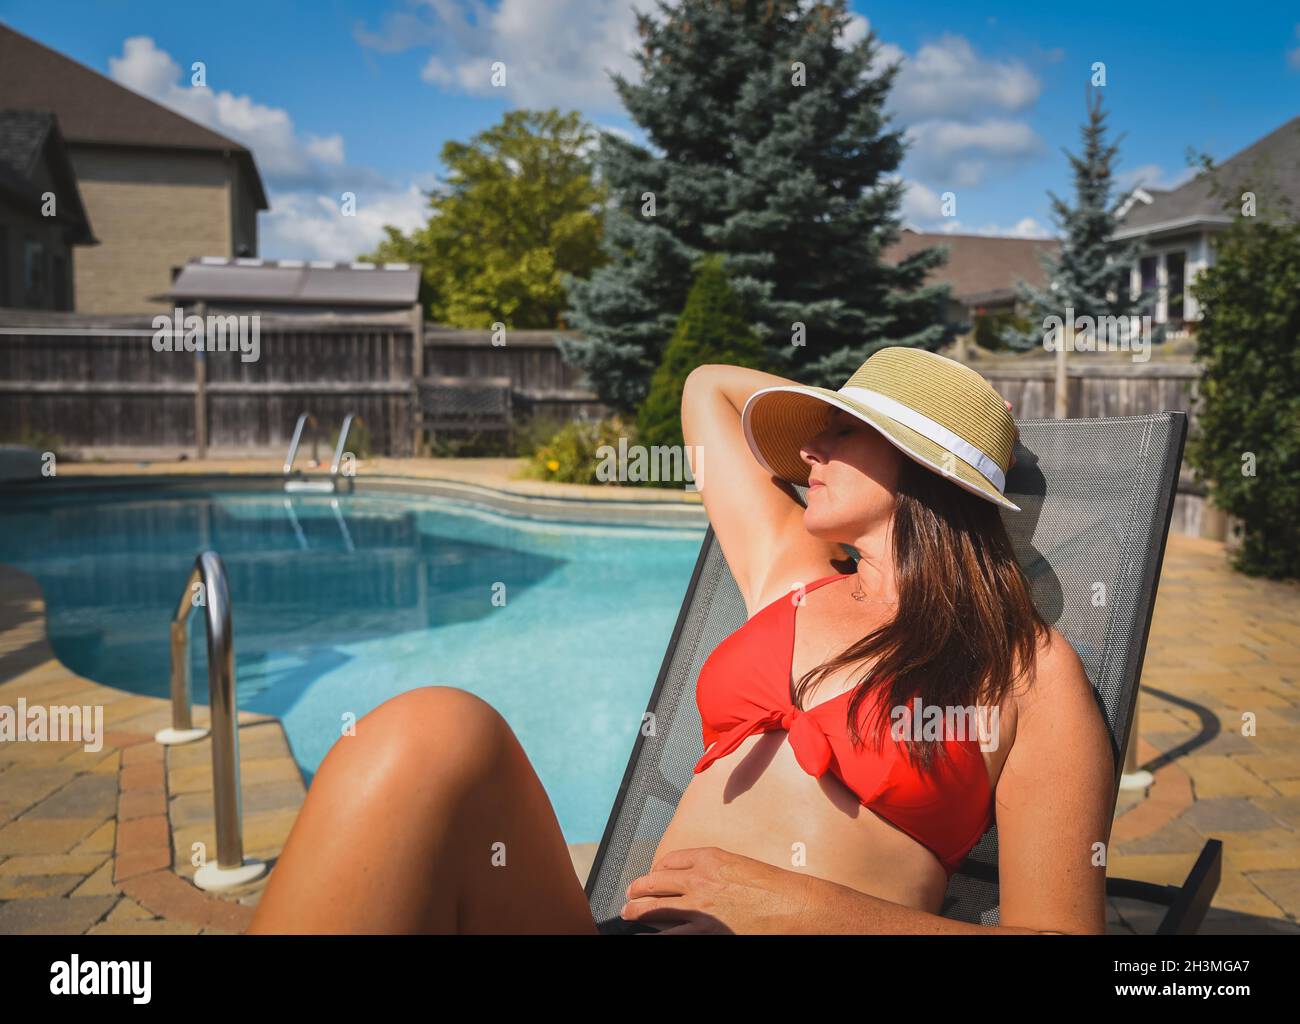 Woman in red bikini and sun hat lounging by the pool in summer. Stock Photo